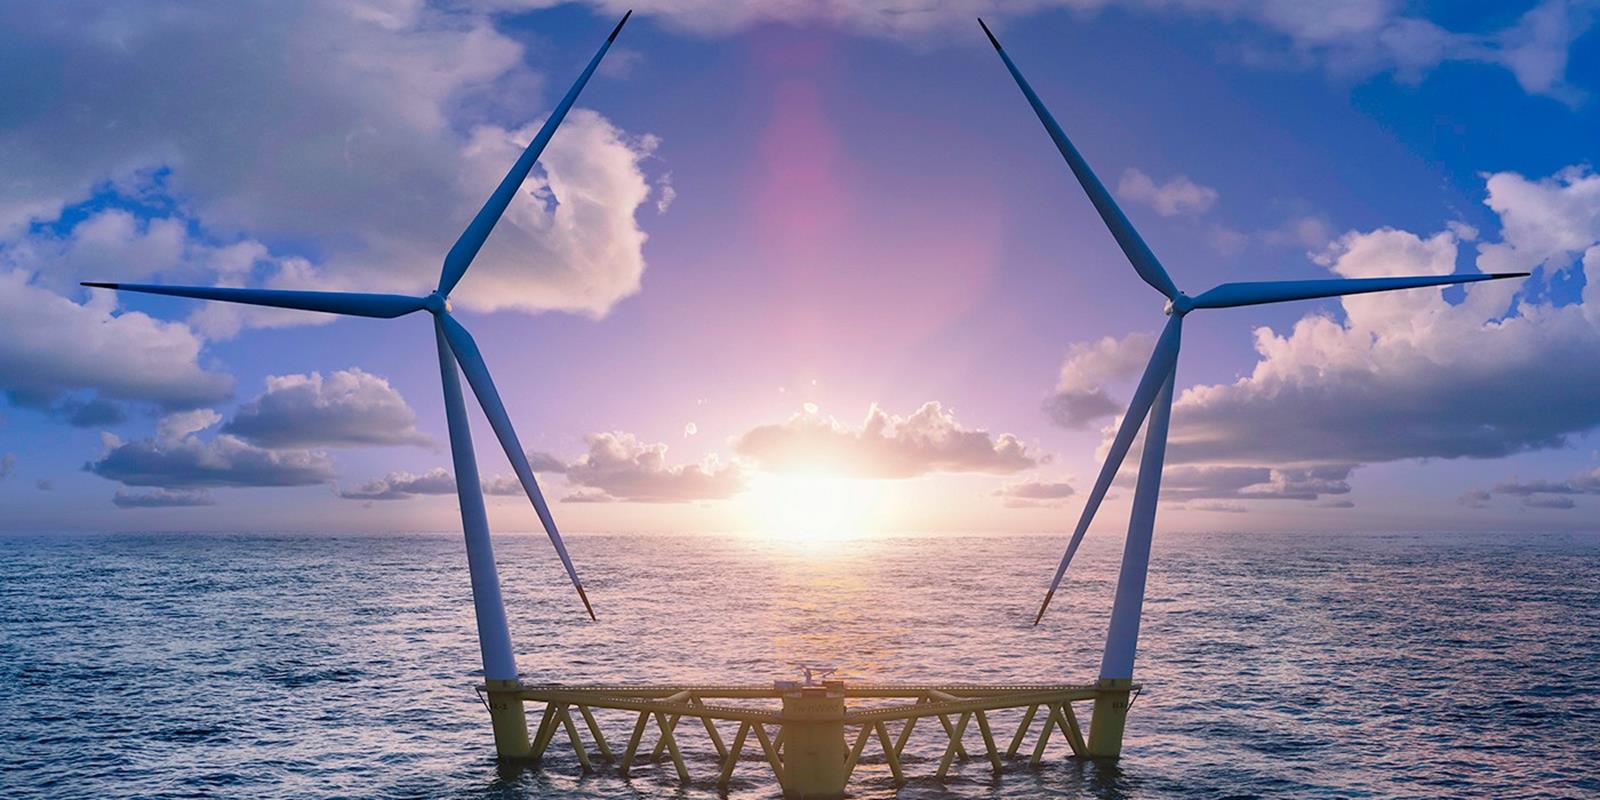 Twin inclined wind turbines from Sweden could conquer the Italian seas